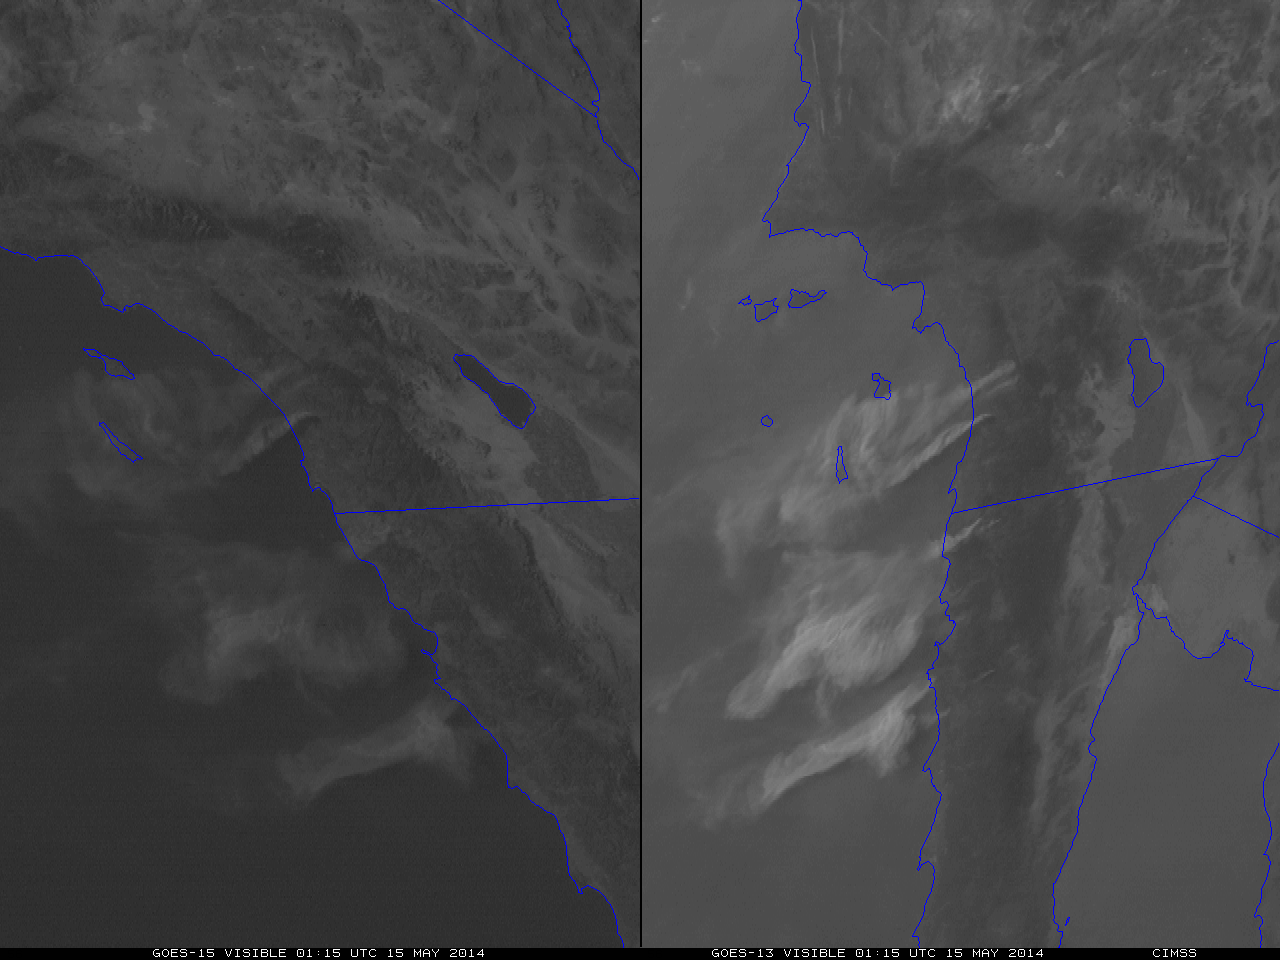 GOES-15 (left) and GOES-13 (right) 0.63 µm visible channel images